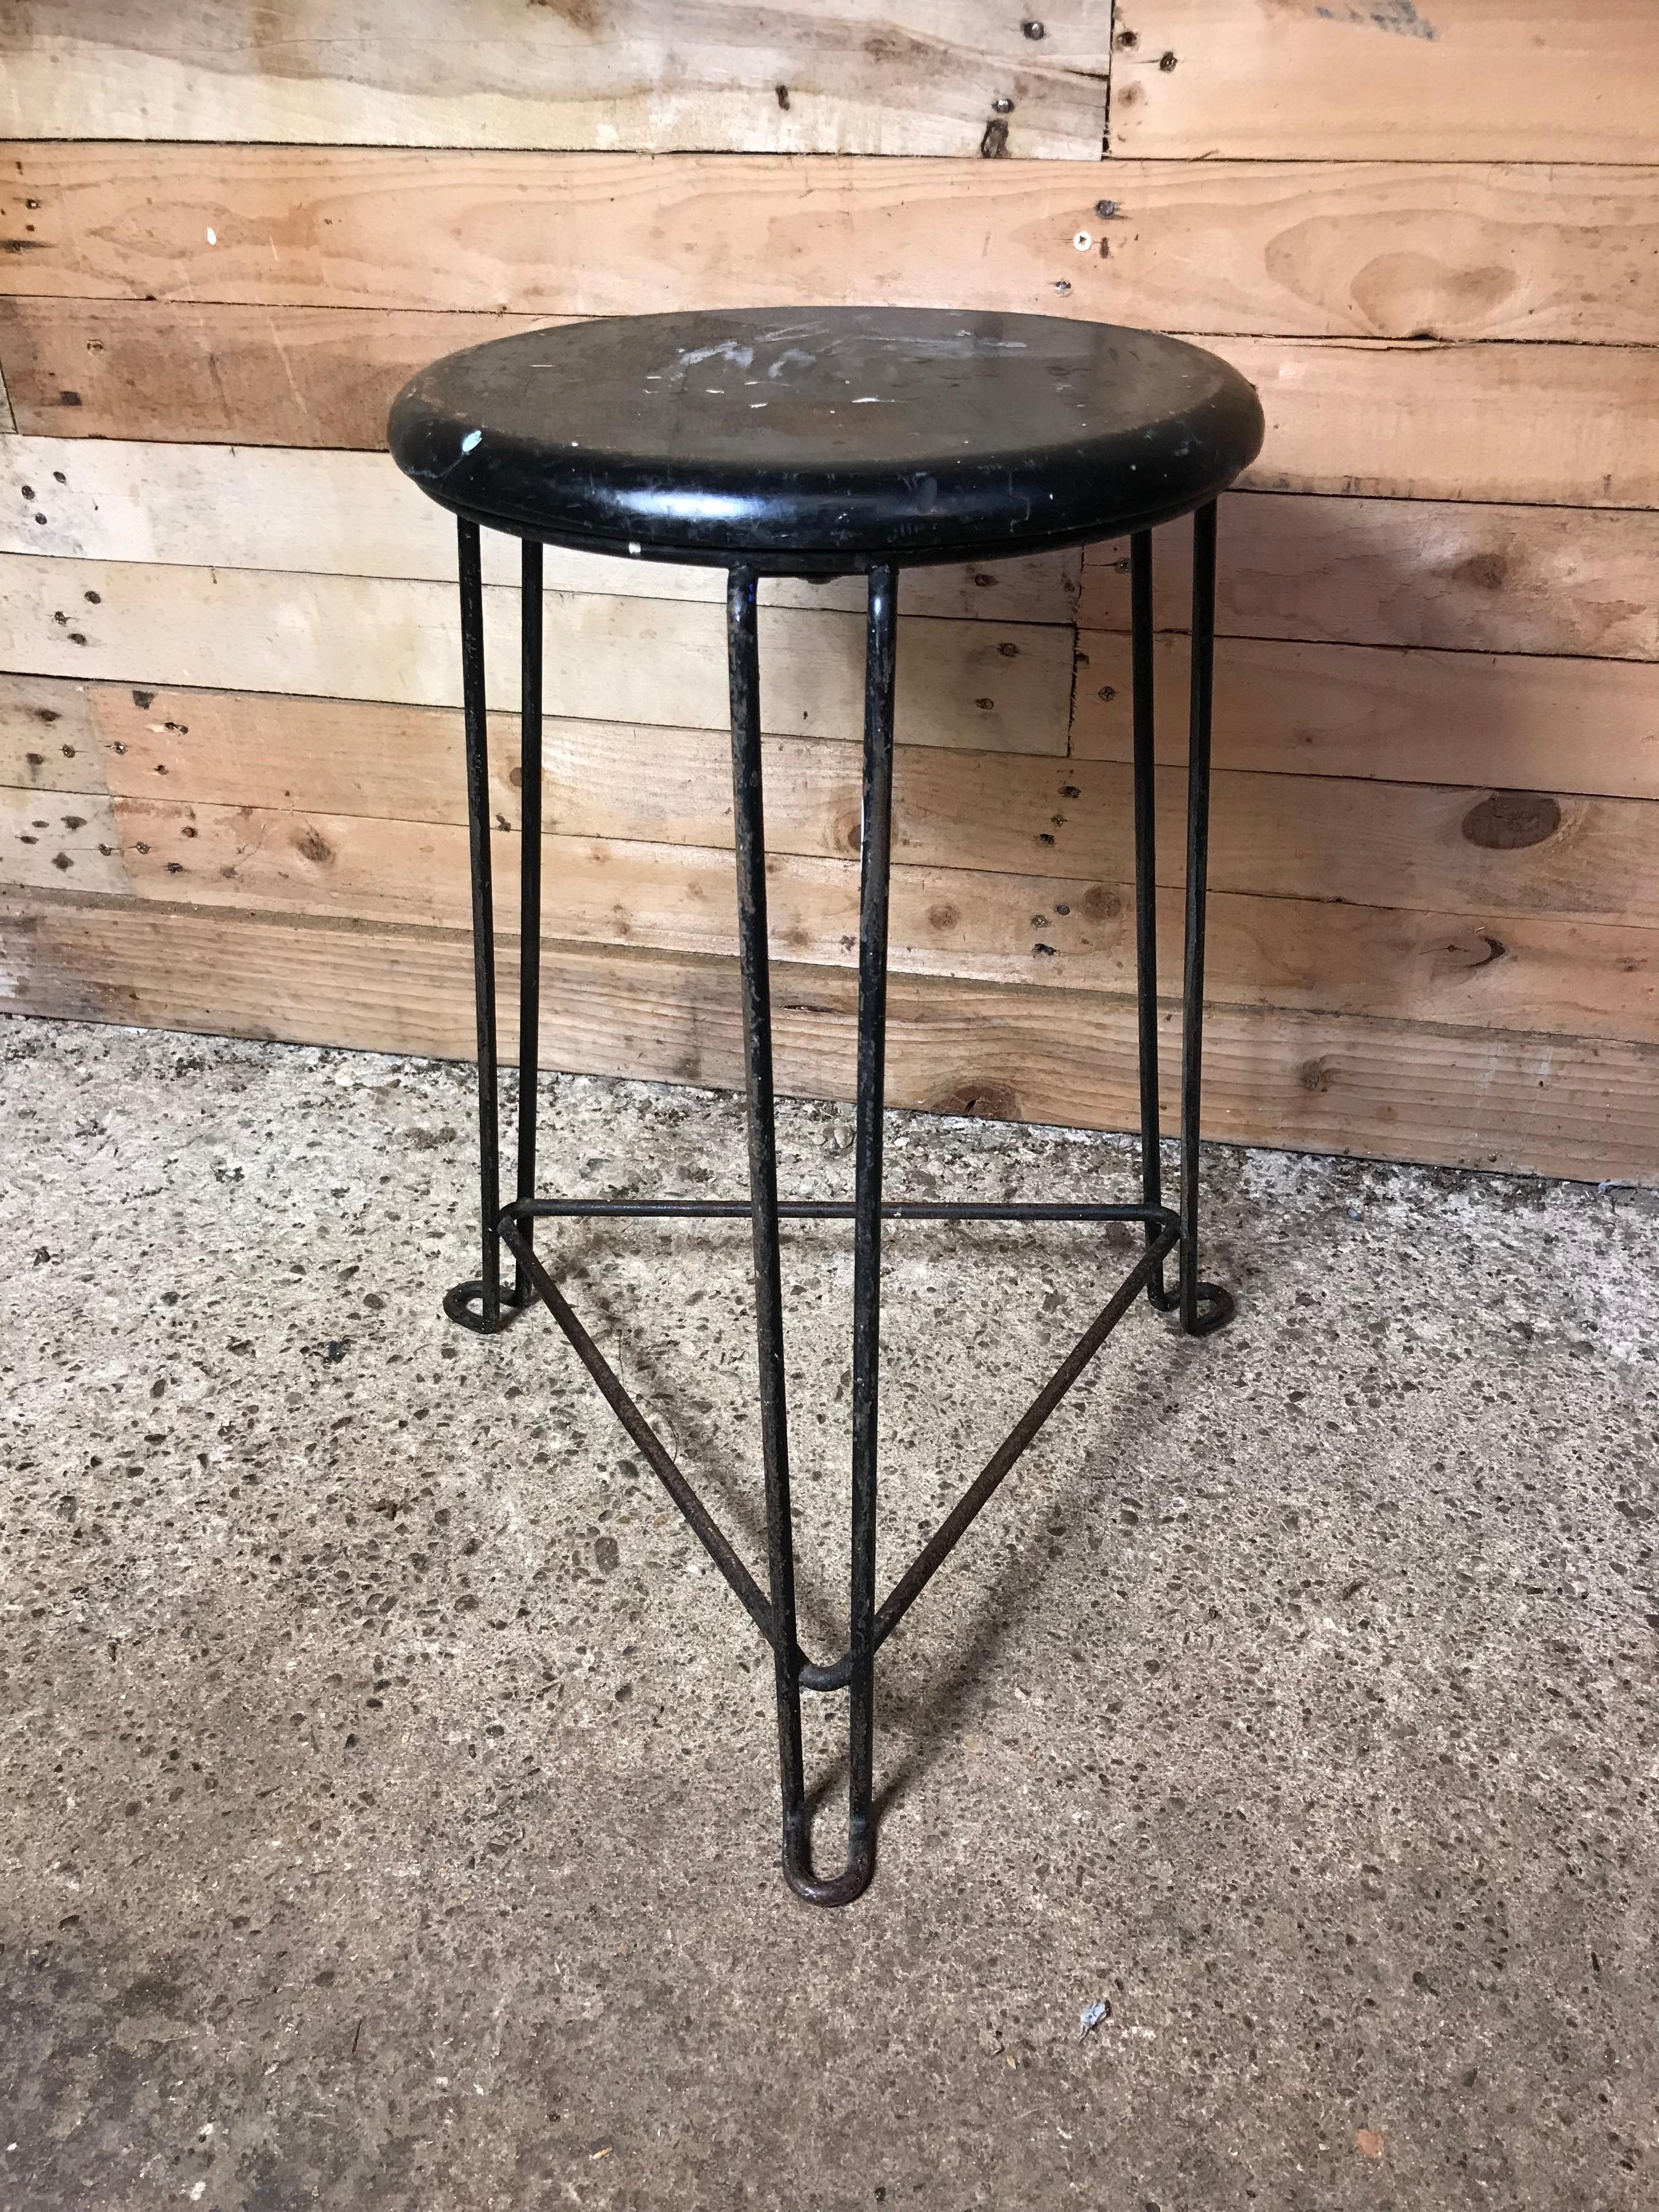 Dutch Set of 4 Retro 1960s Wooden Seat with Metal Frame Tomado Stools For Sale